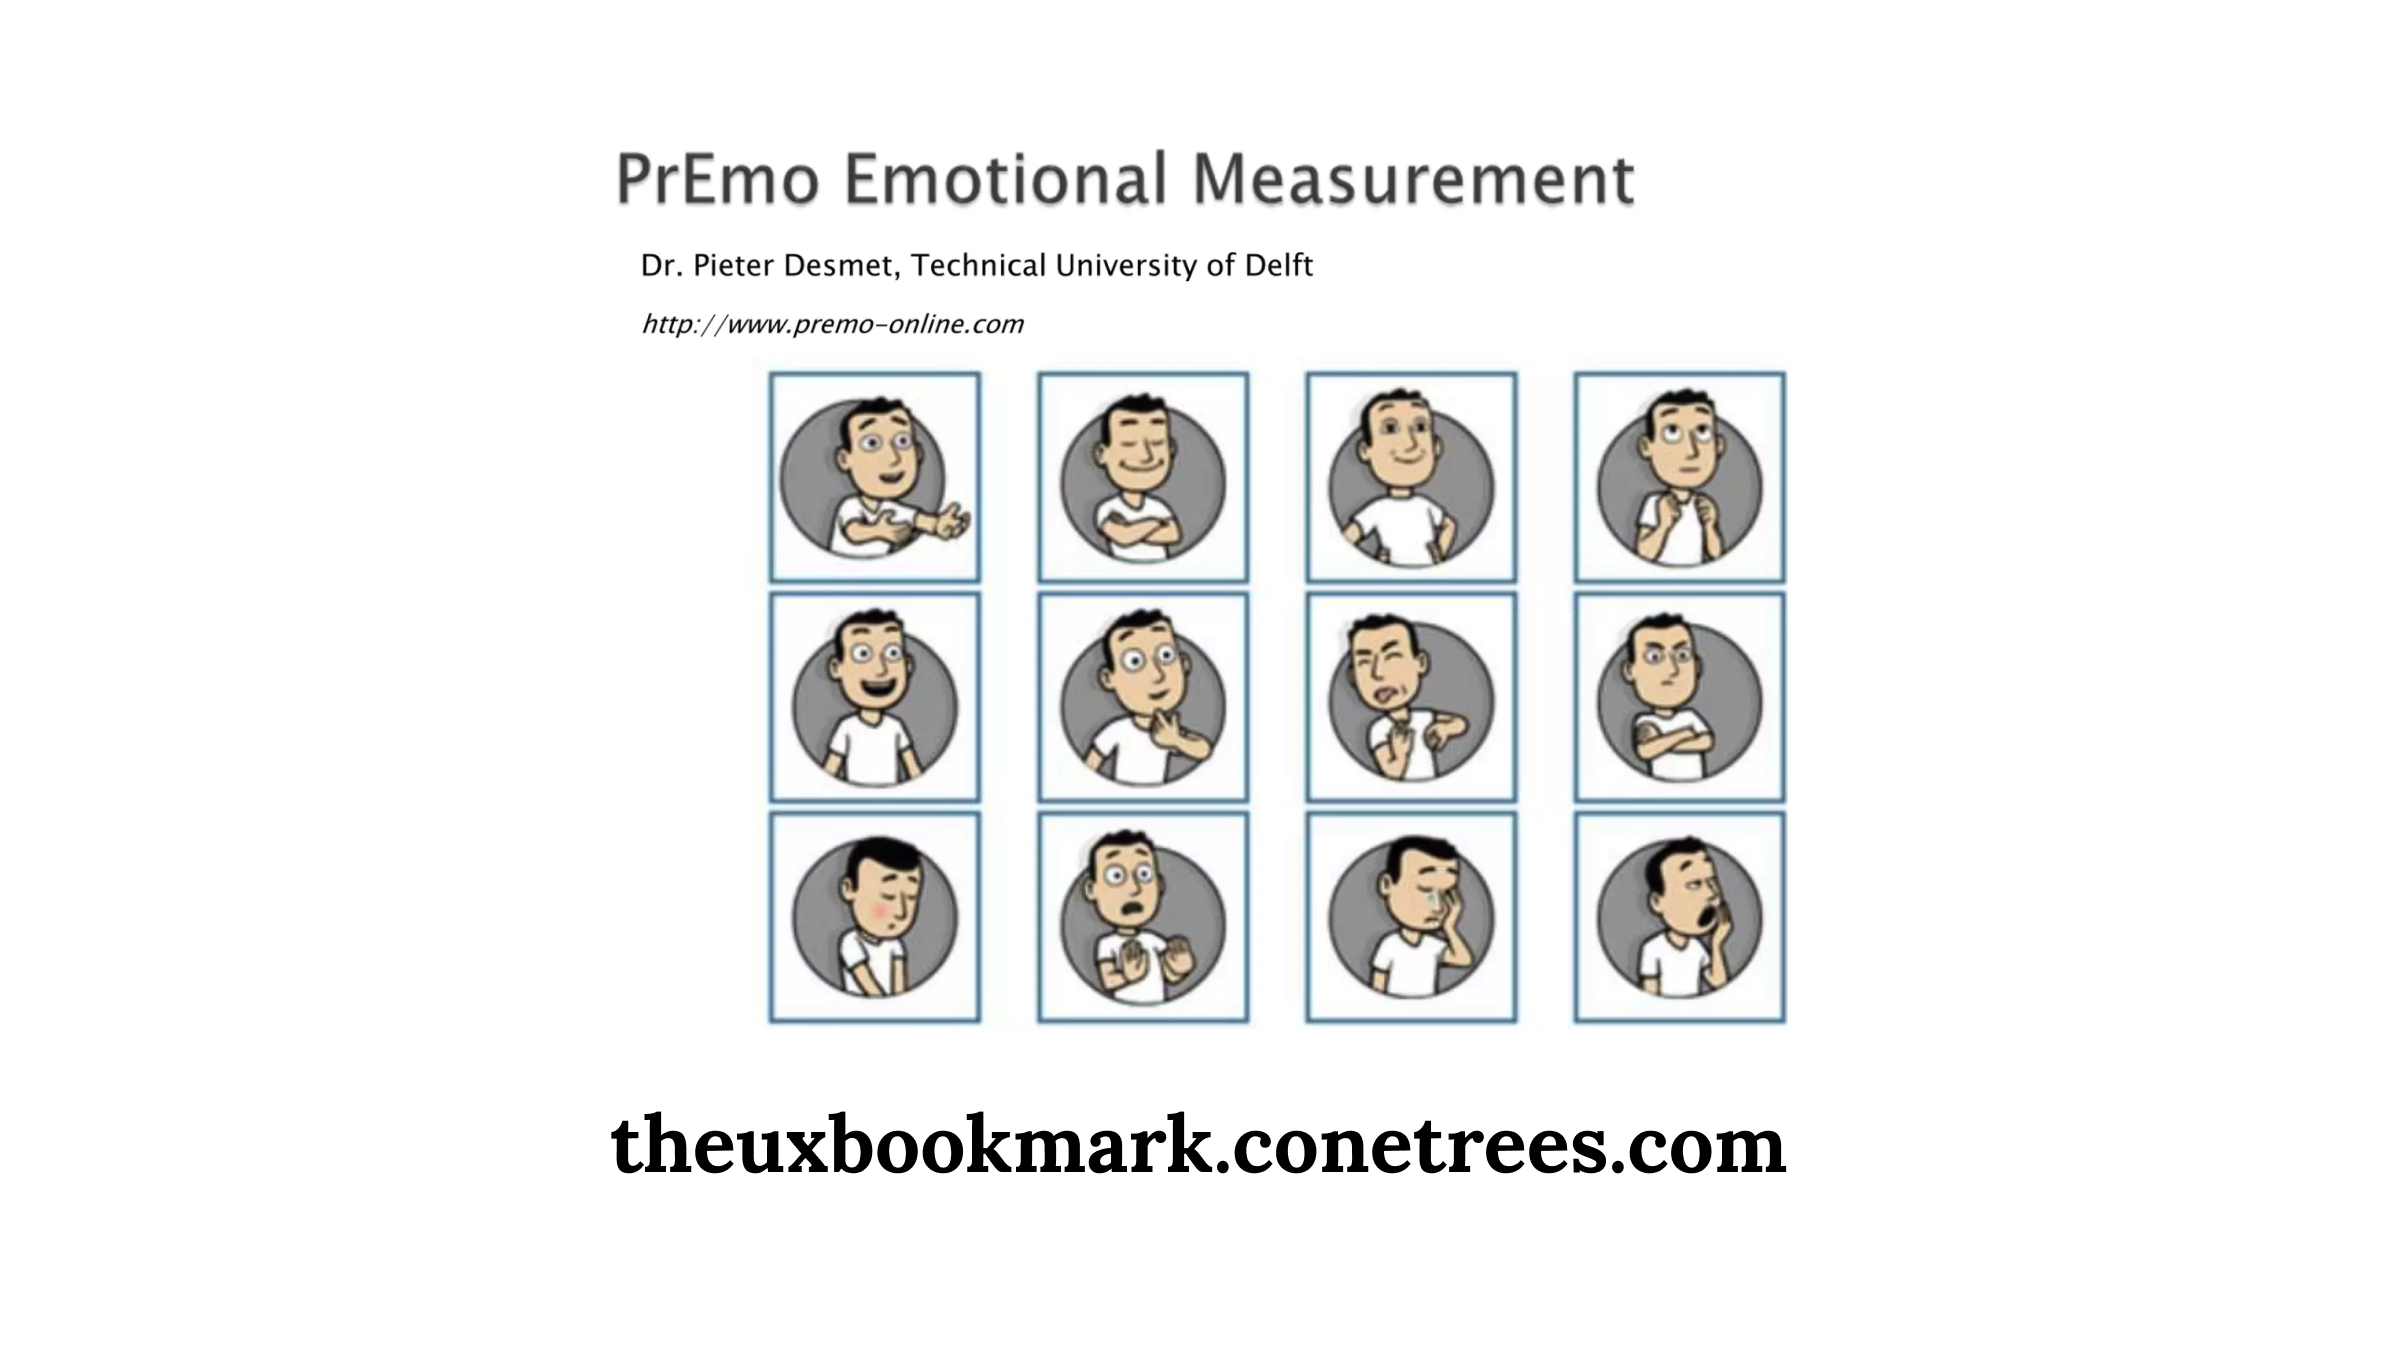 Preference and Desirability Testing: Measuring Emotional Response to Guide Design